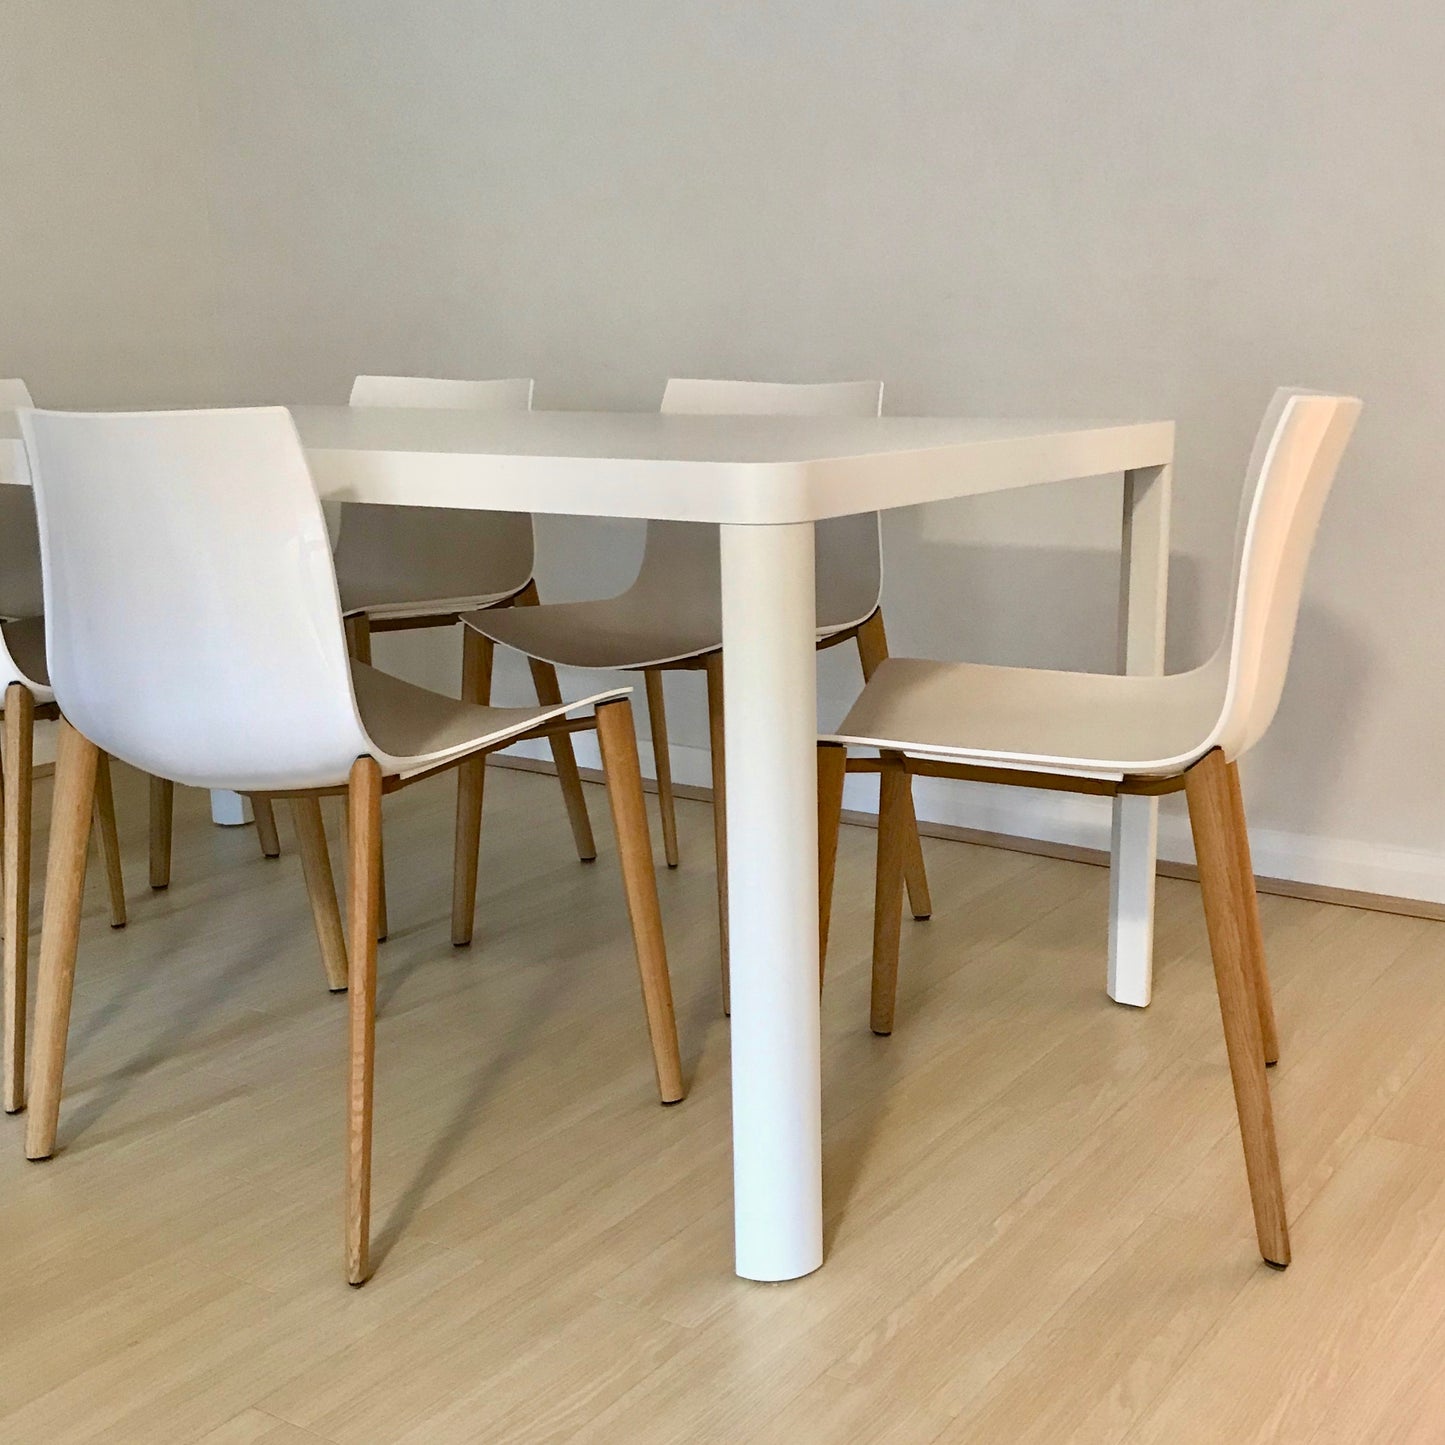 Set of SIX Catifa 46 Dining Chairs by Arper through Stylecraft